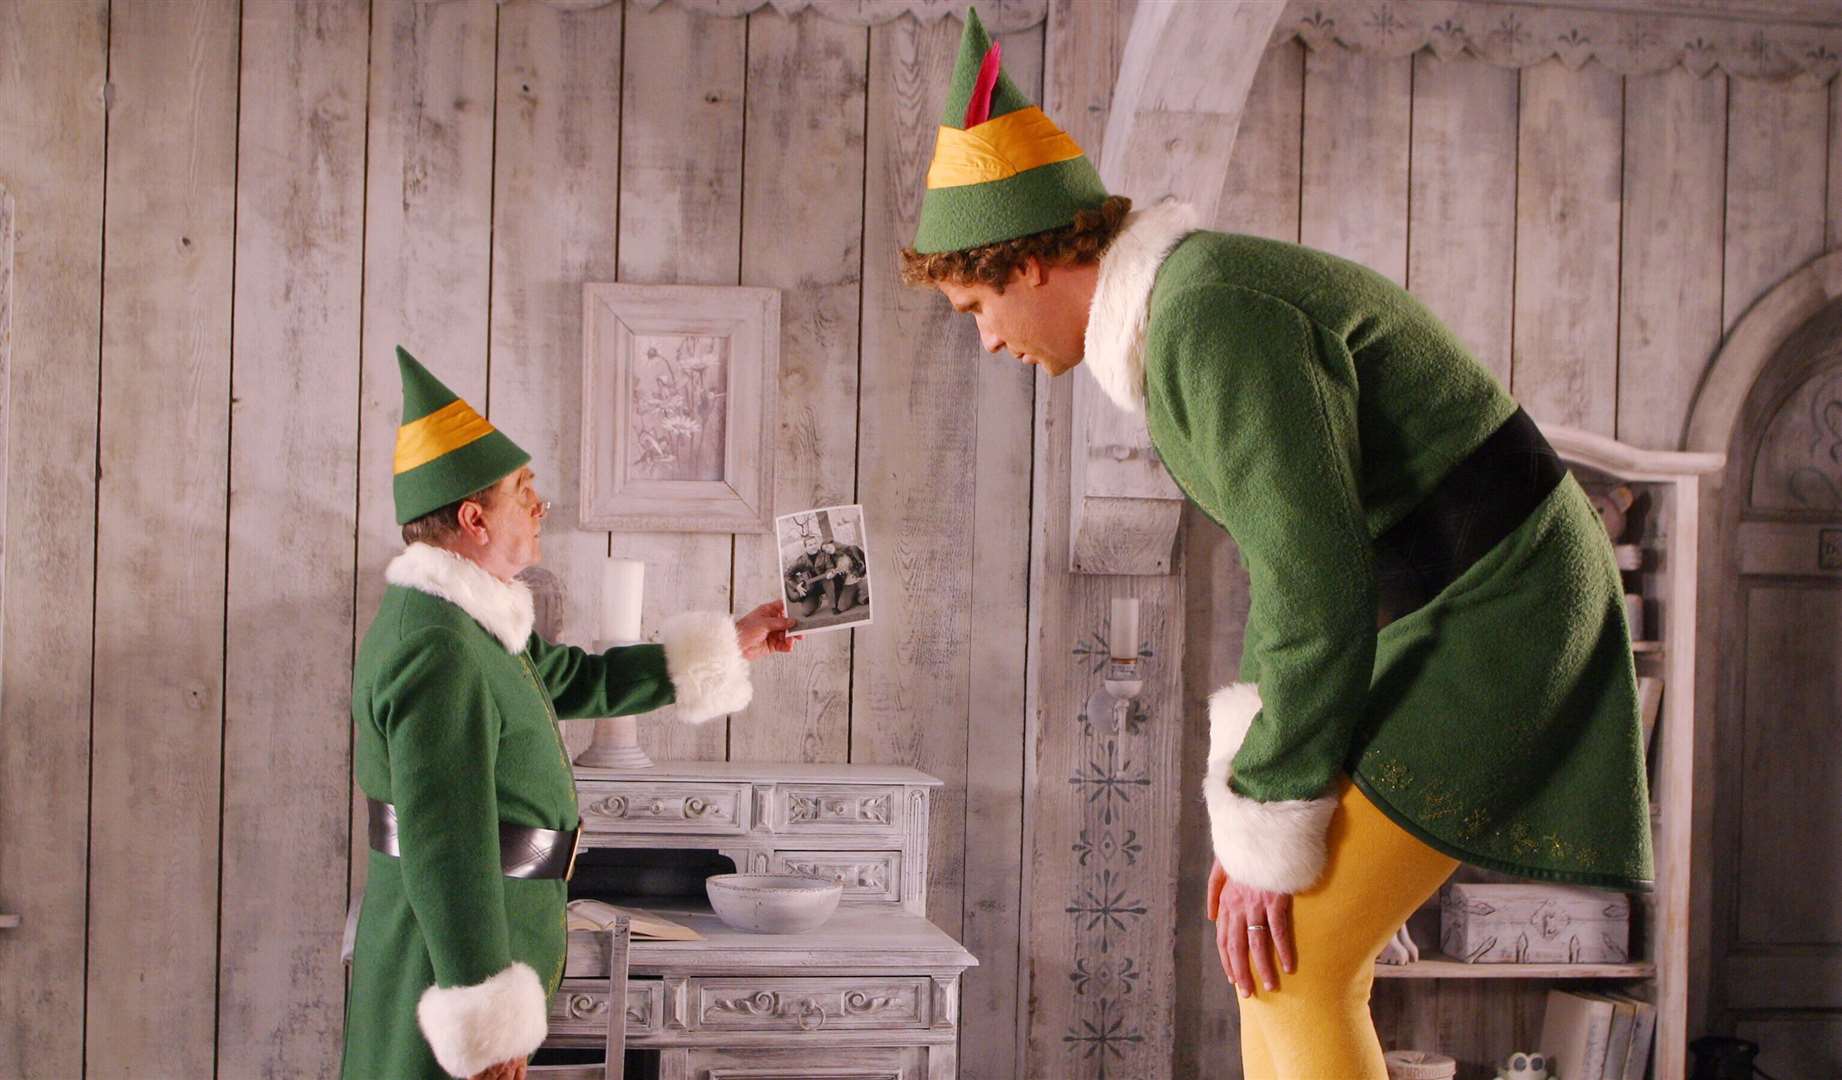 Buddy is back on the big screen as Elf celebrates its 20th anniversary. Picture: New Line Cinema